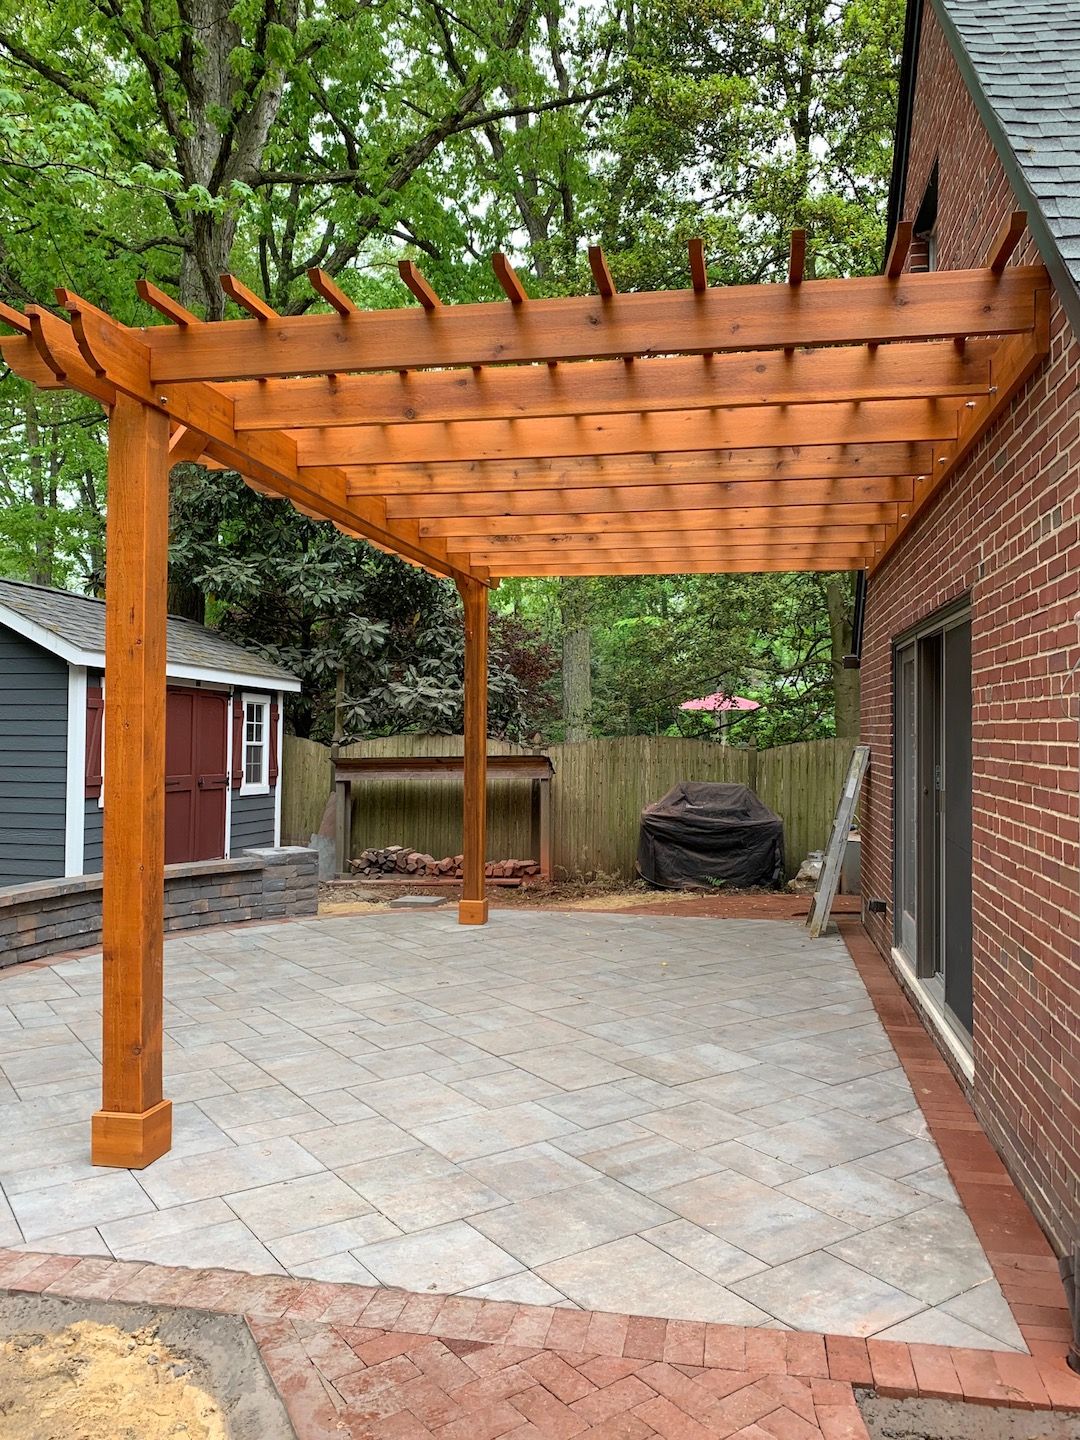 31 pergola ideas to add shade, privacy and style to your outside space